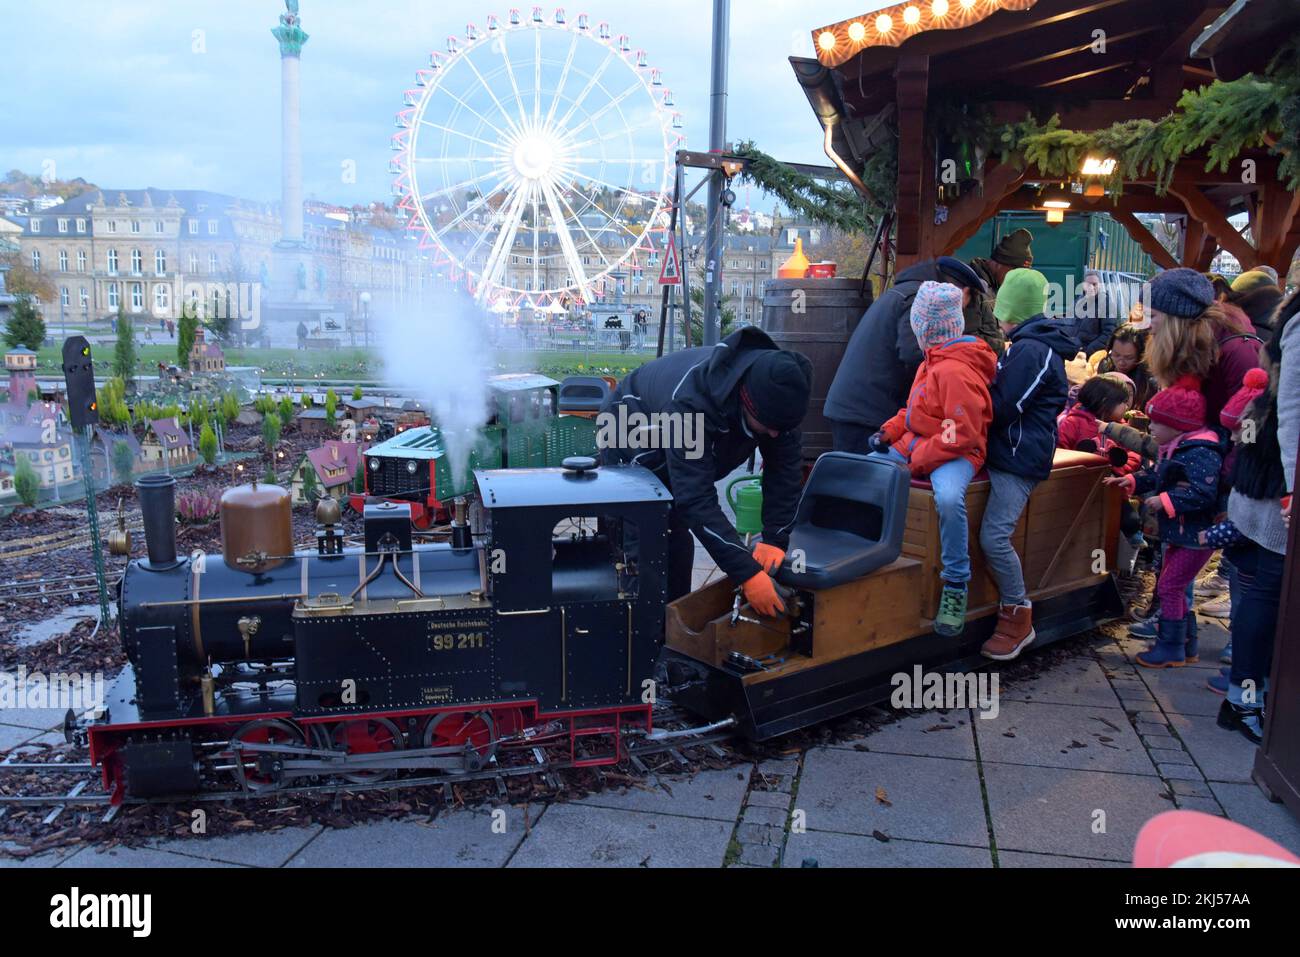 Stuttgart, Germany, 24th November 2022. An engineer fills the miniature steam locomotive with water at Stuttgart Christmas Market. The market, with 200 illuminated and decorated stalls, a fairground and miniature railway display is open every day until 23rd December. G.P.Essex/Alamy Live News Stock Photo